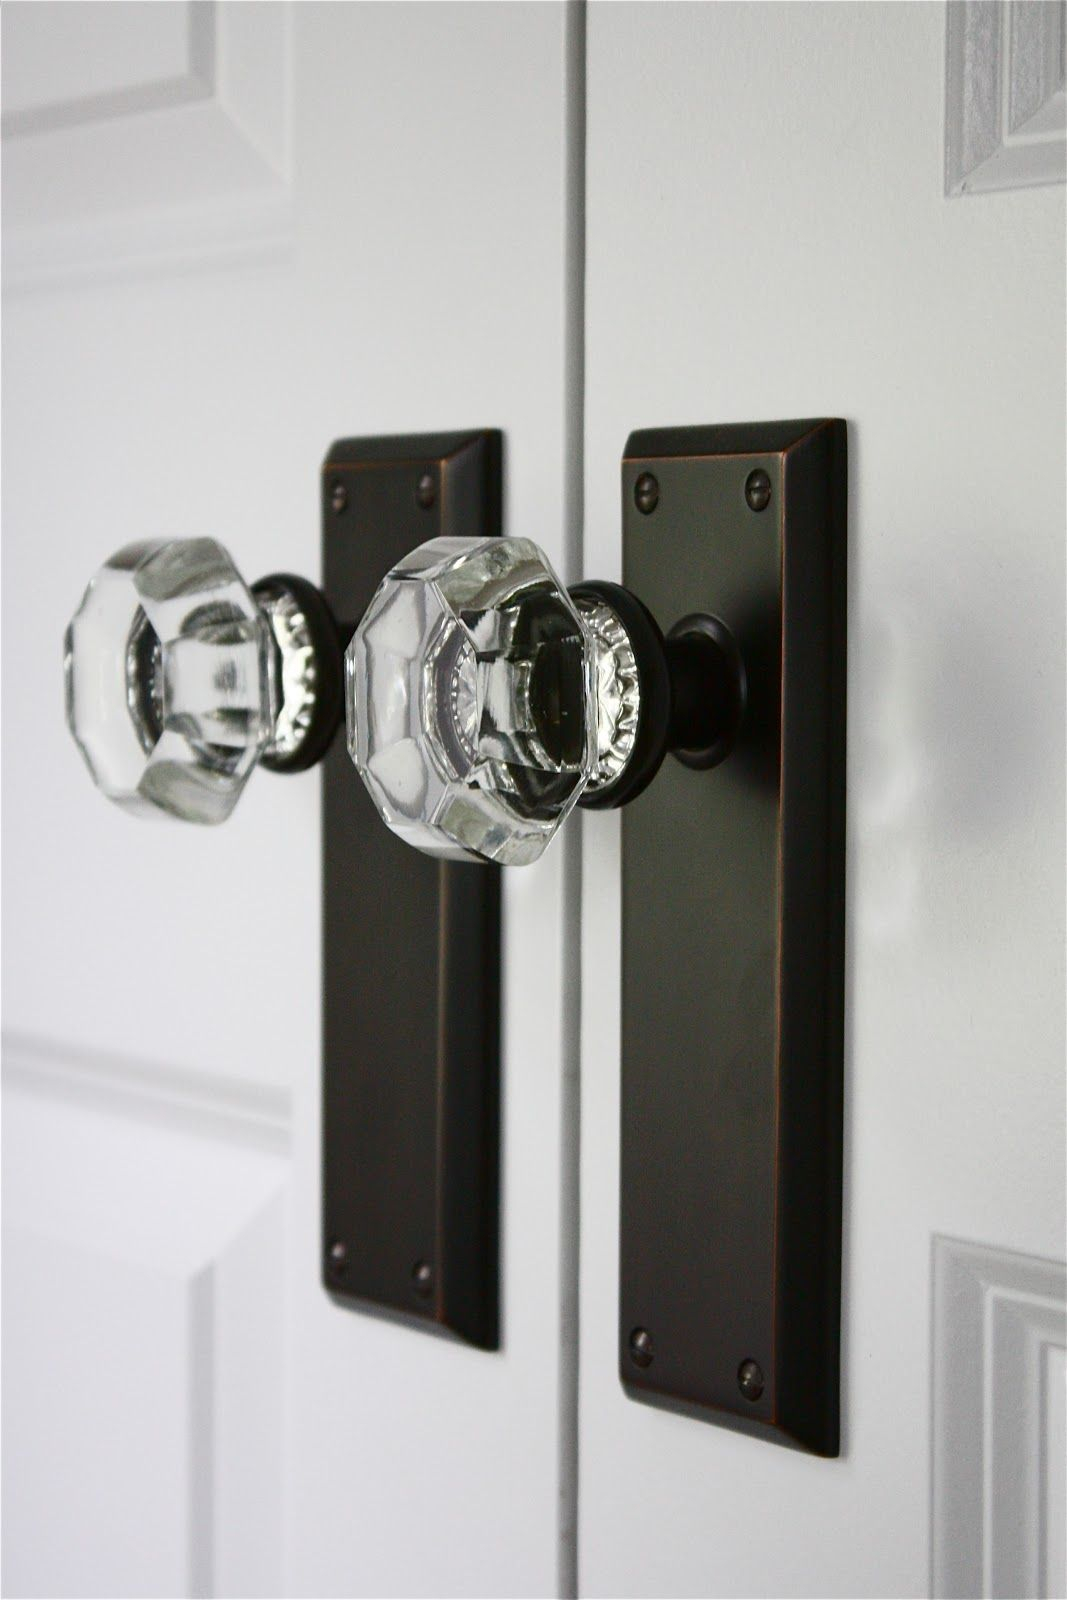 Crystal Door Knobs Home Details Add An Elegant Touch To The Home within proportions 1067 X 1600